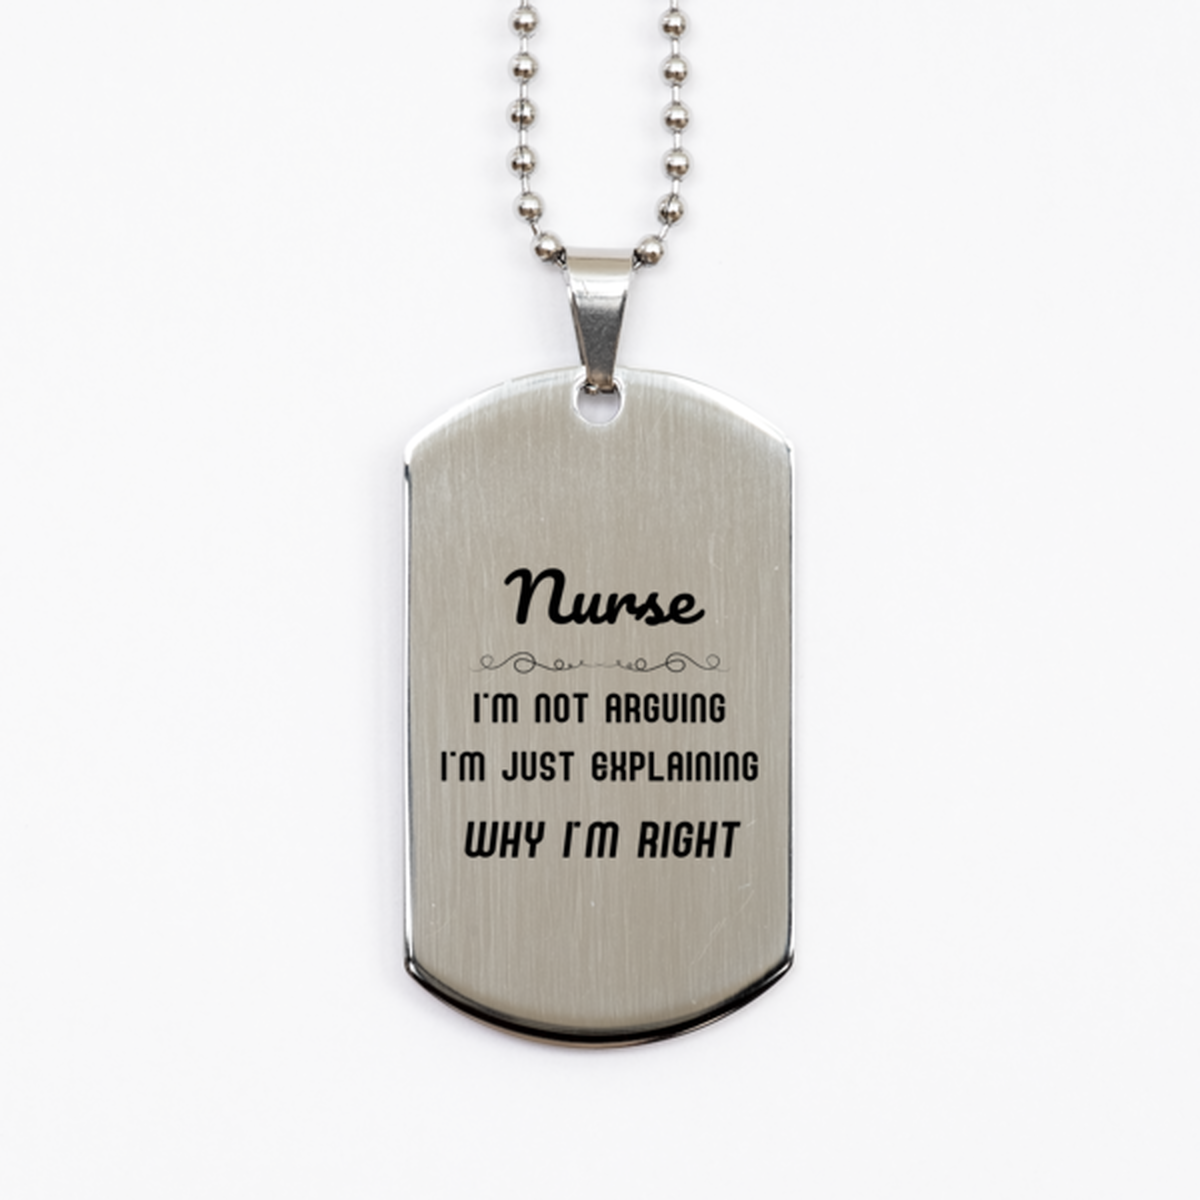 Nurse I'm not Arguing. I'm Just Explaining Why I'm RIGHT Silver Dog Tag, Funny Saying Quote Nurse Gifts For Nurse Graduation Birthday Christmas Gifts for Men Women Coworker